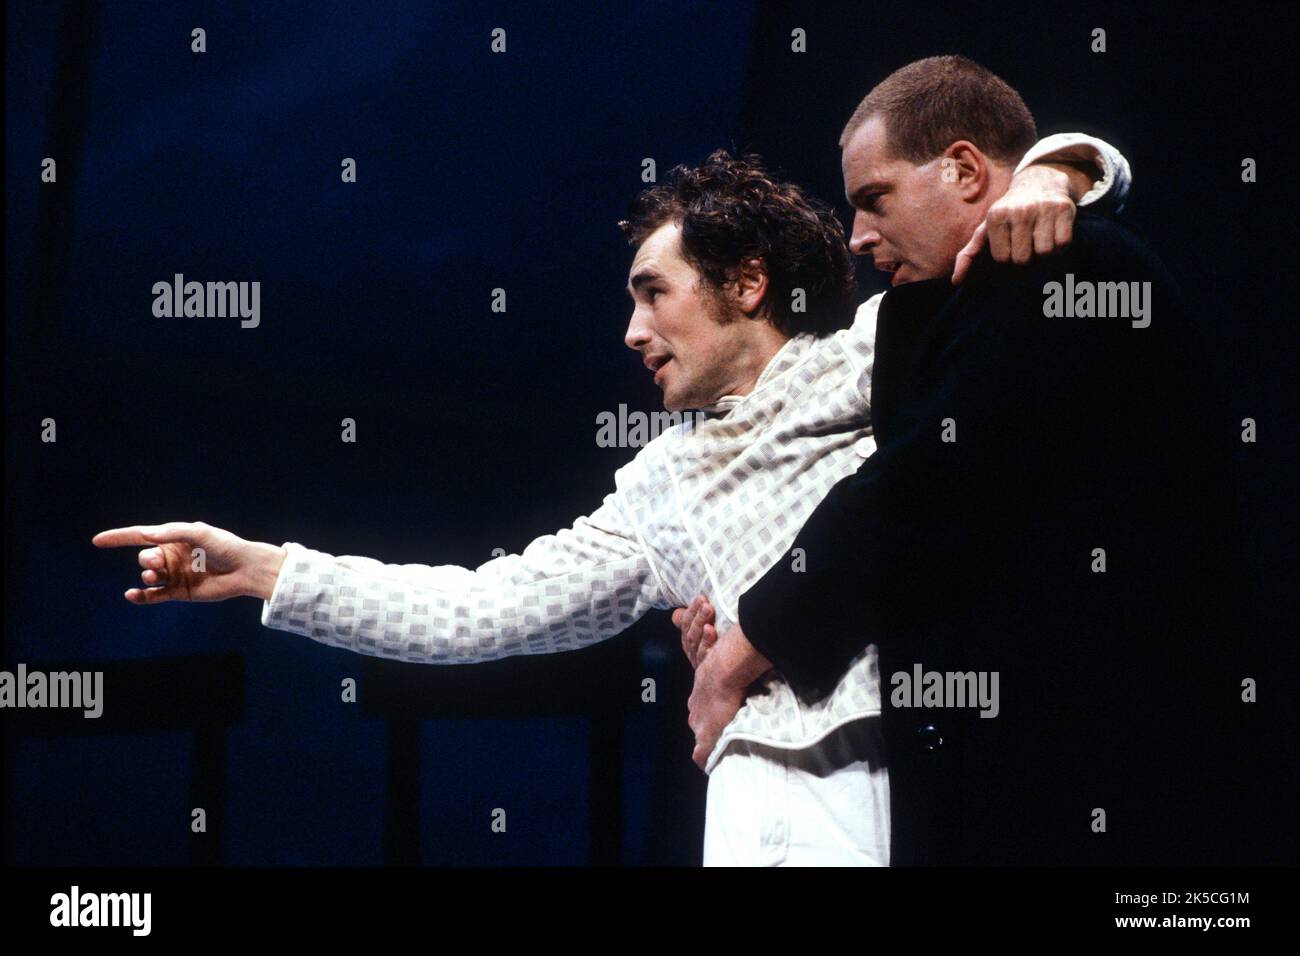 final scene, Hamlet is mortally wounded - l-r: Mark Rylance (Hamlet), Jack Ellis (Horatio) in HAMLET by Shakespeare at the Royal Shakespeare Company (RSC), Barbican Theatre, London EC2  23/11/1989 music: Claire van Kampen  design: Antony McDonald  lighting: Thomas Webster  fights: Alexis Denisof  director: Ron Daniels Stock Photo